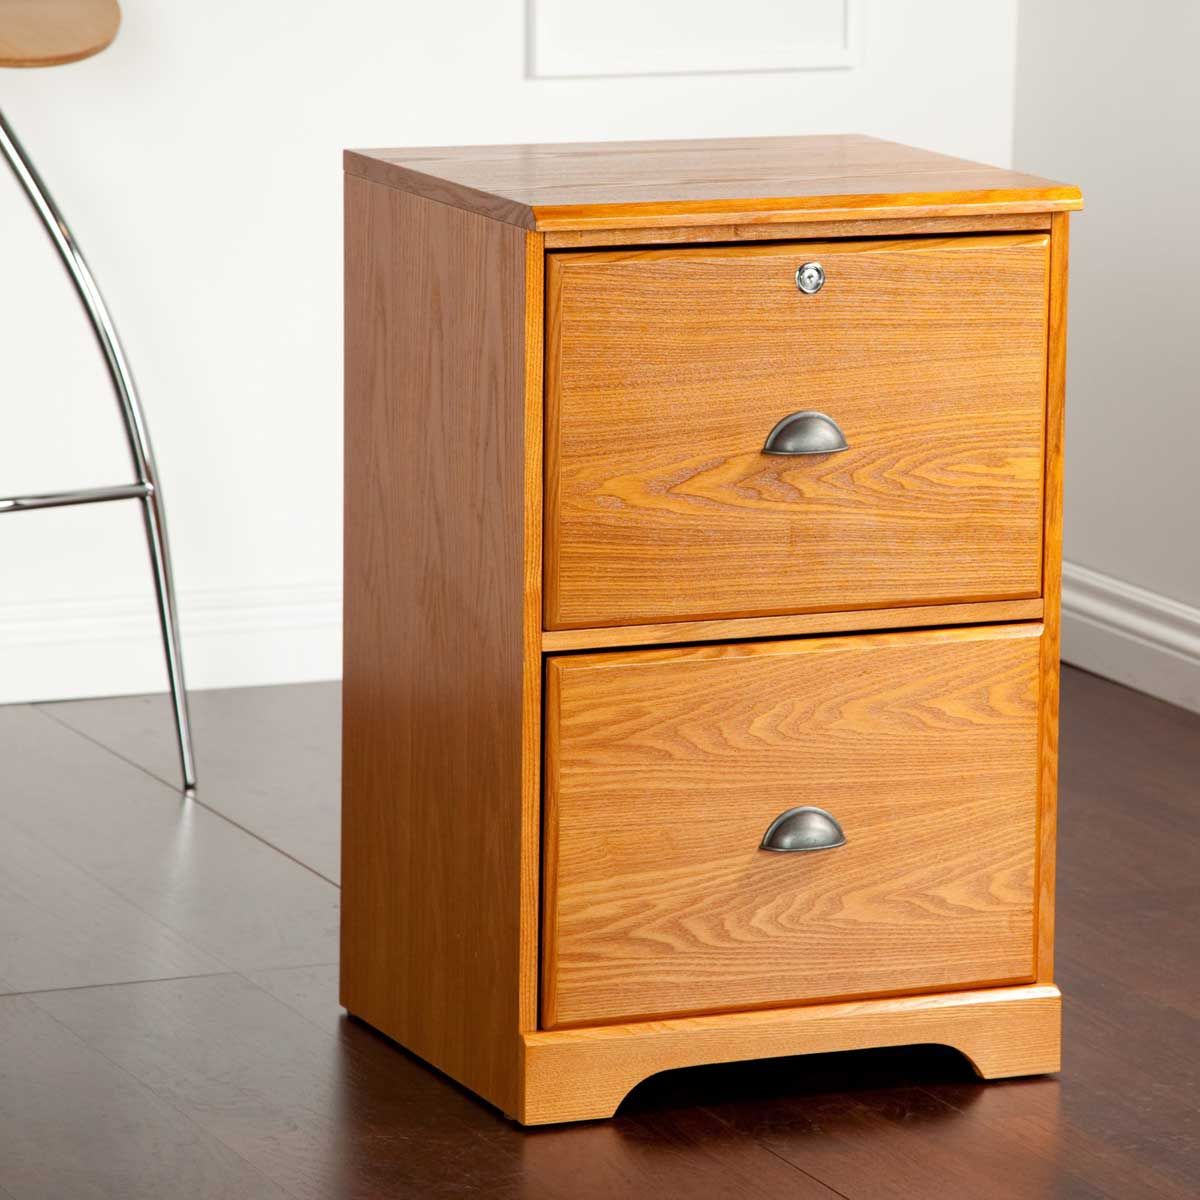 Update Your Office With Fashionable Wooden File Cabinet Ikea – Homesfeed Regarding Wood Cabinet With Drawers (View 9 of 20)